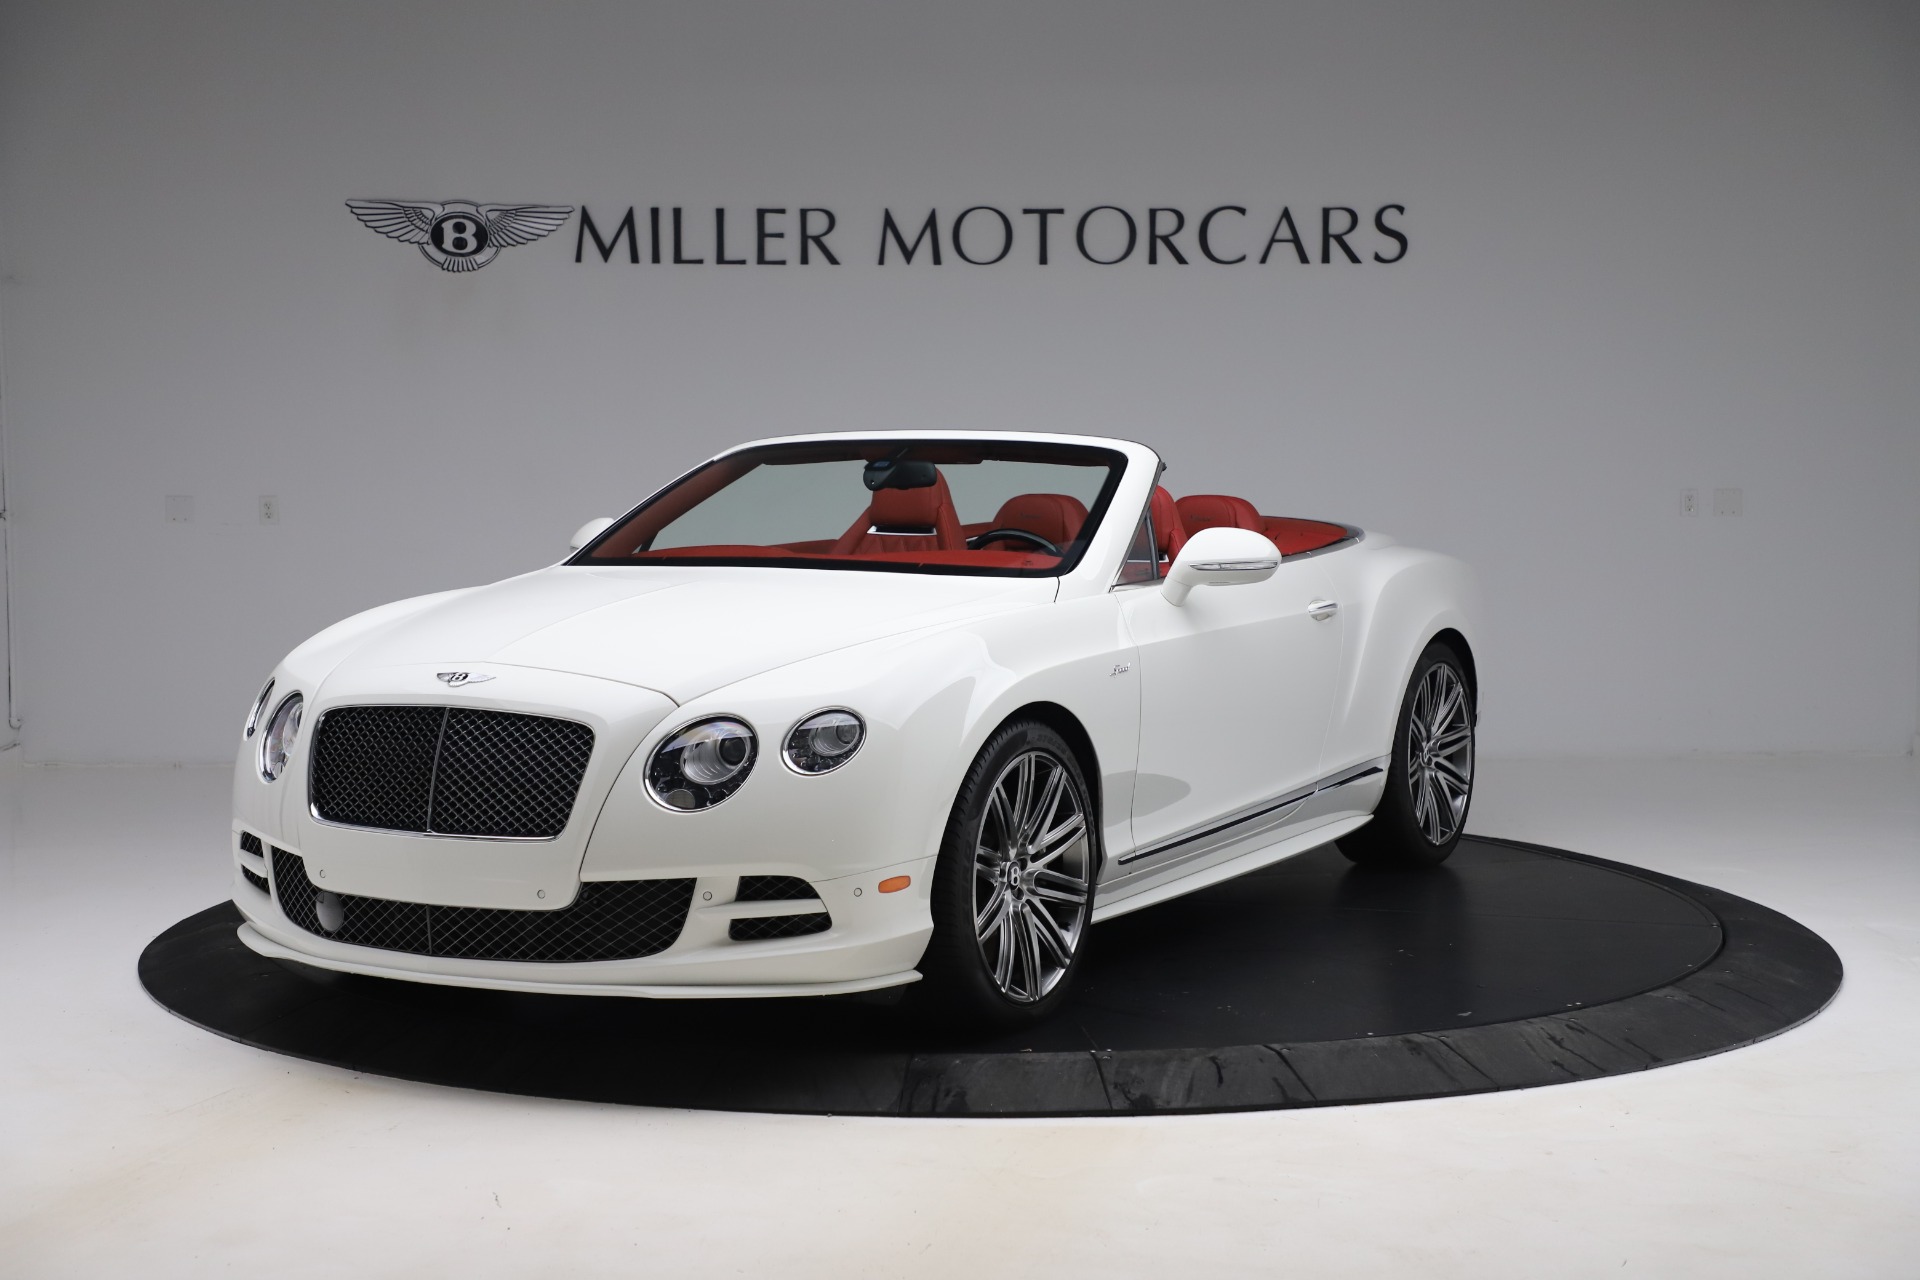 Used 2015 Bentley Continental GT Speed for sale Sold at Pagani of Greenwich in Greenwich CT 06830 1